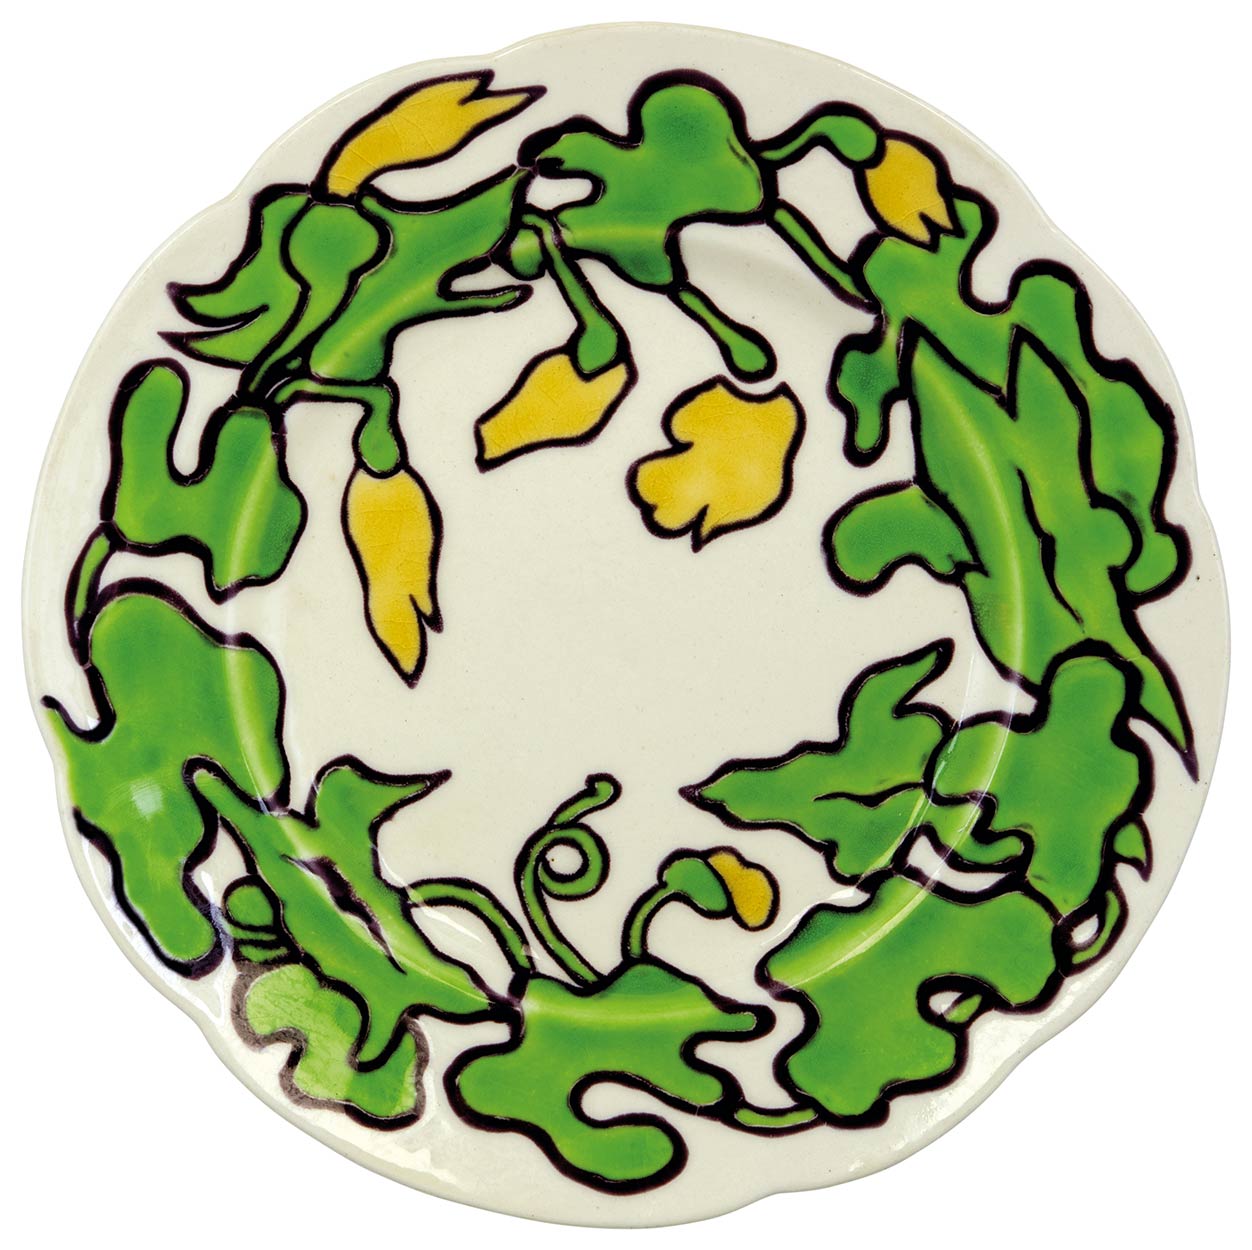 Zsolnay Plate from the Andrássy dinner service, Zsolnay, 1898